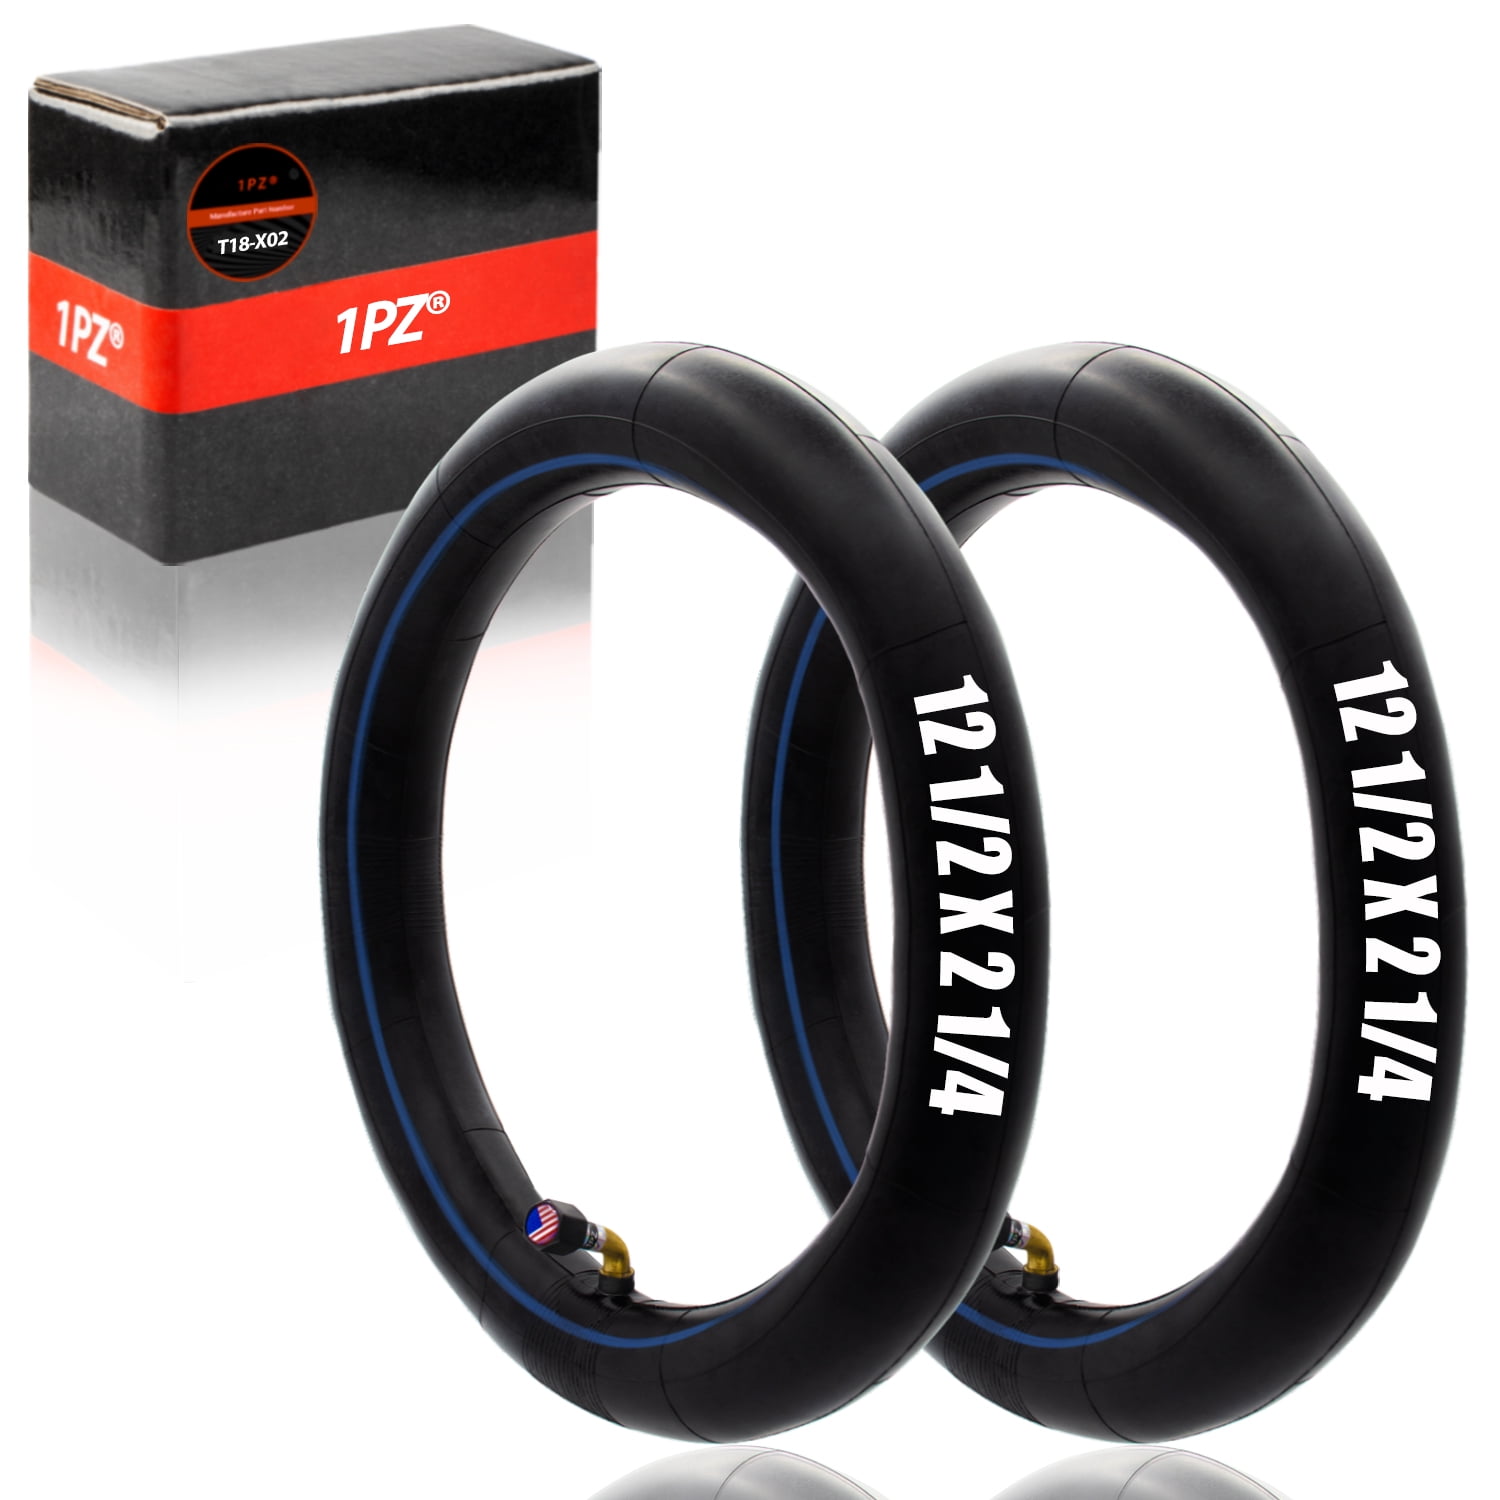 QUINNY BUZZ REPLACEMENT TYRES and INNER TUBES  X 2 